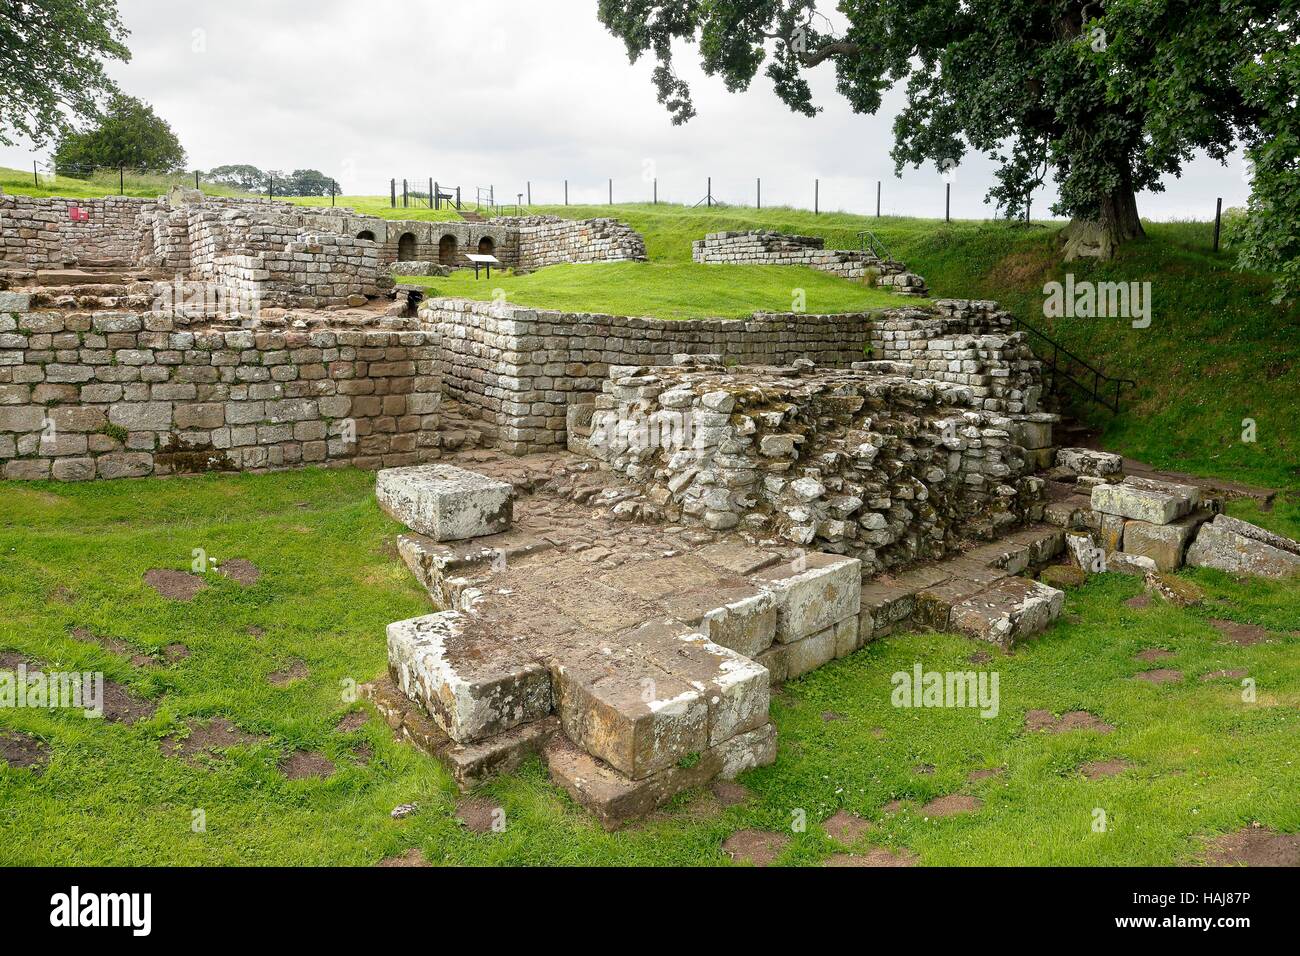 Chesters Roman Fort and Museum bathhouse. Chollerford, Hexham, Northumberland, England, United Kingdom, Europe. Stock Photo